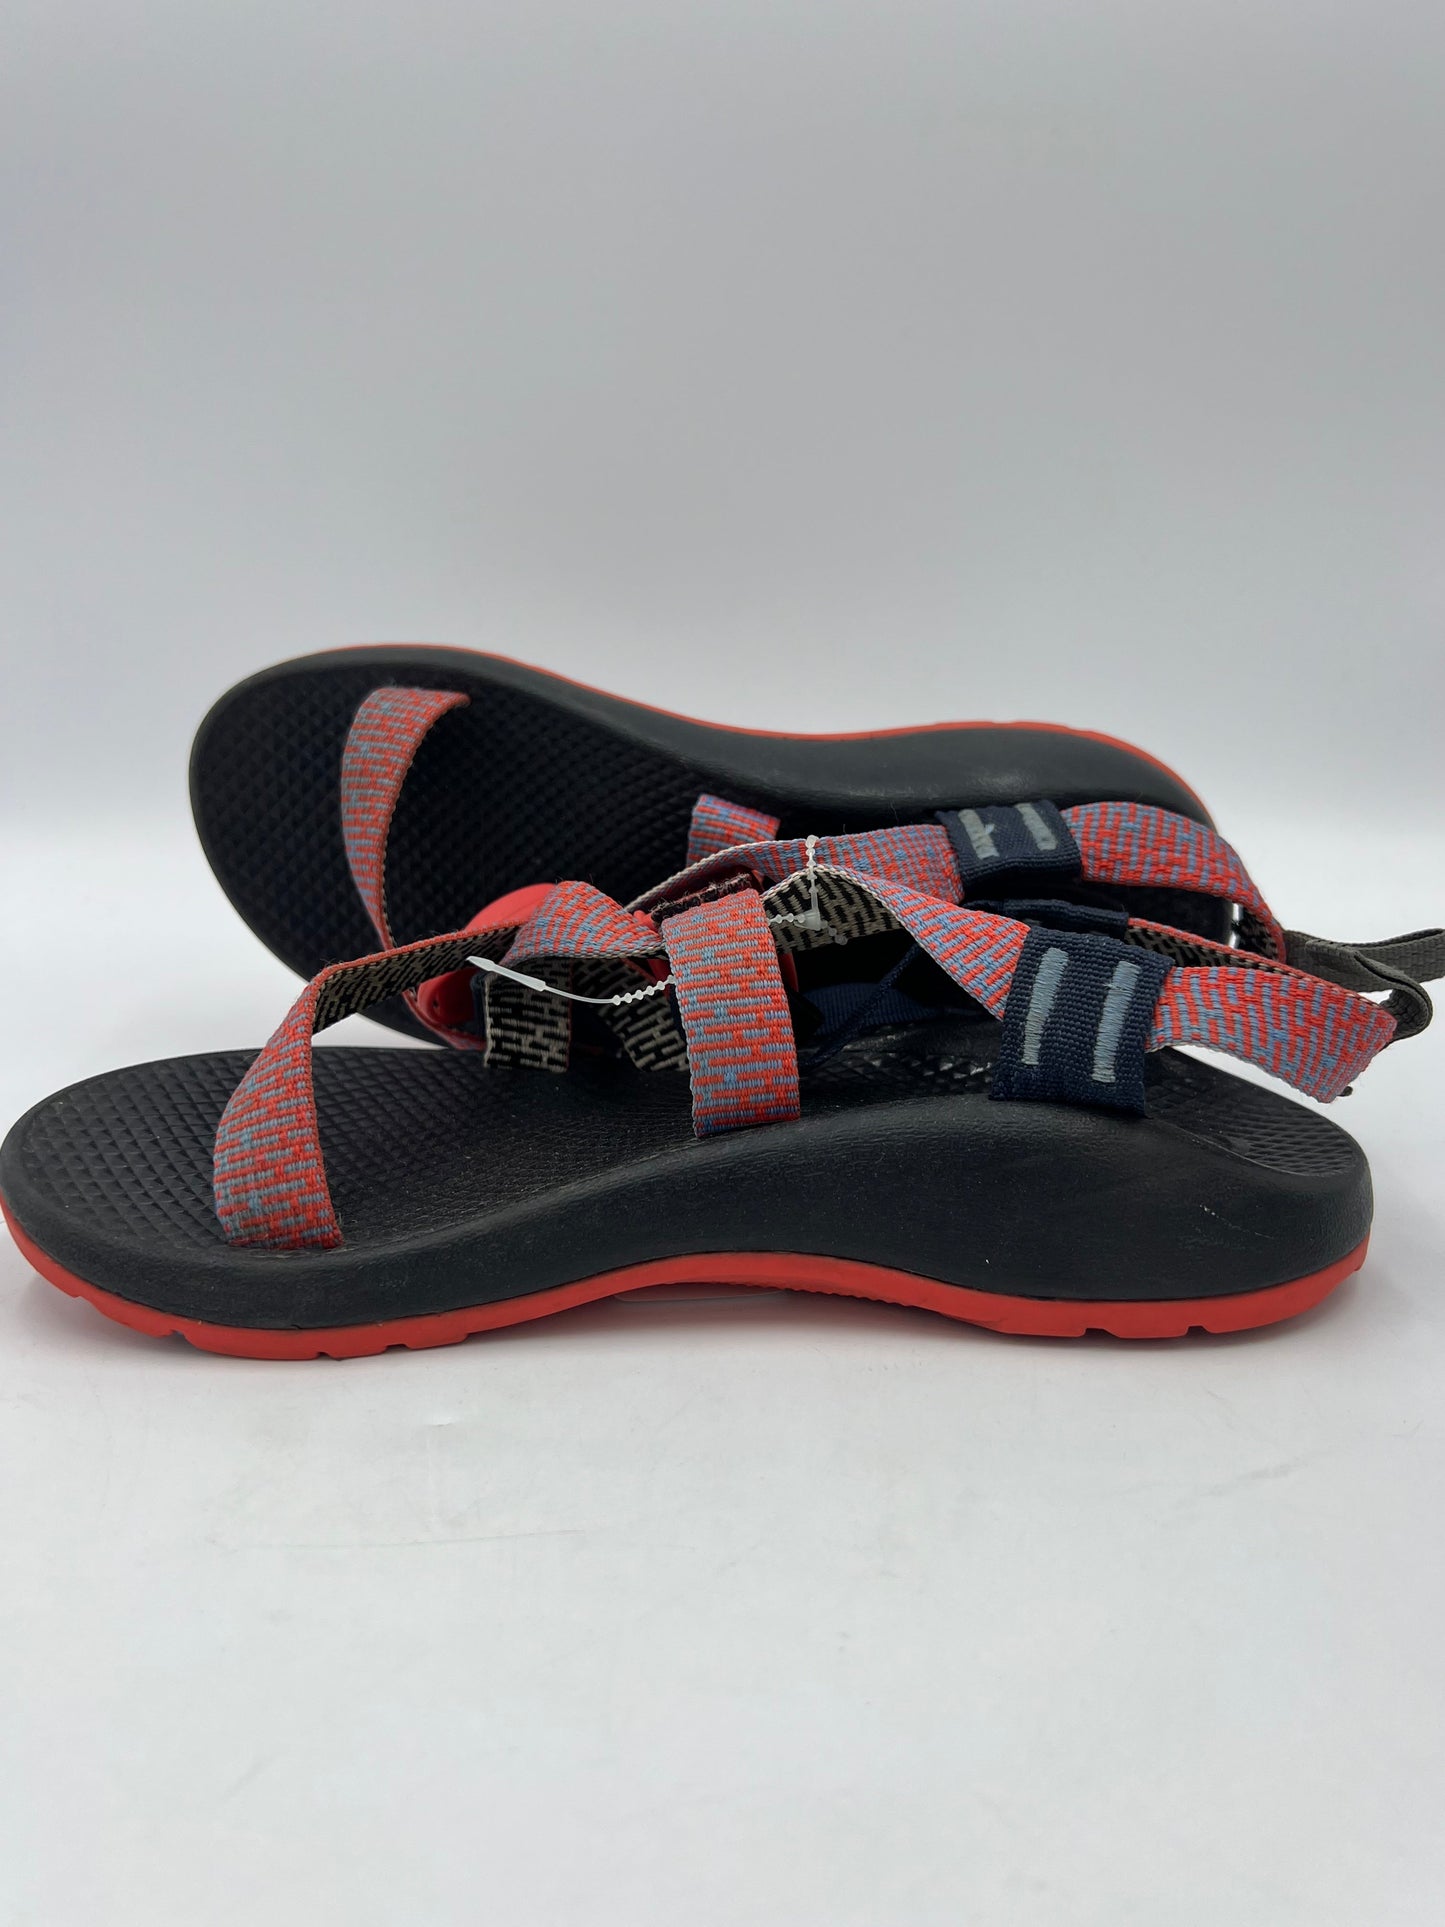 Sandals Designer By Chacos  Size: 5